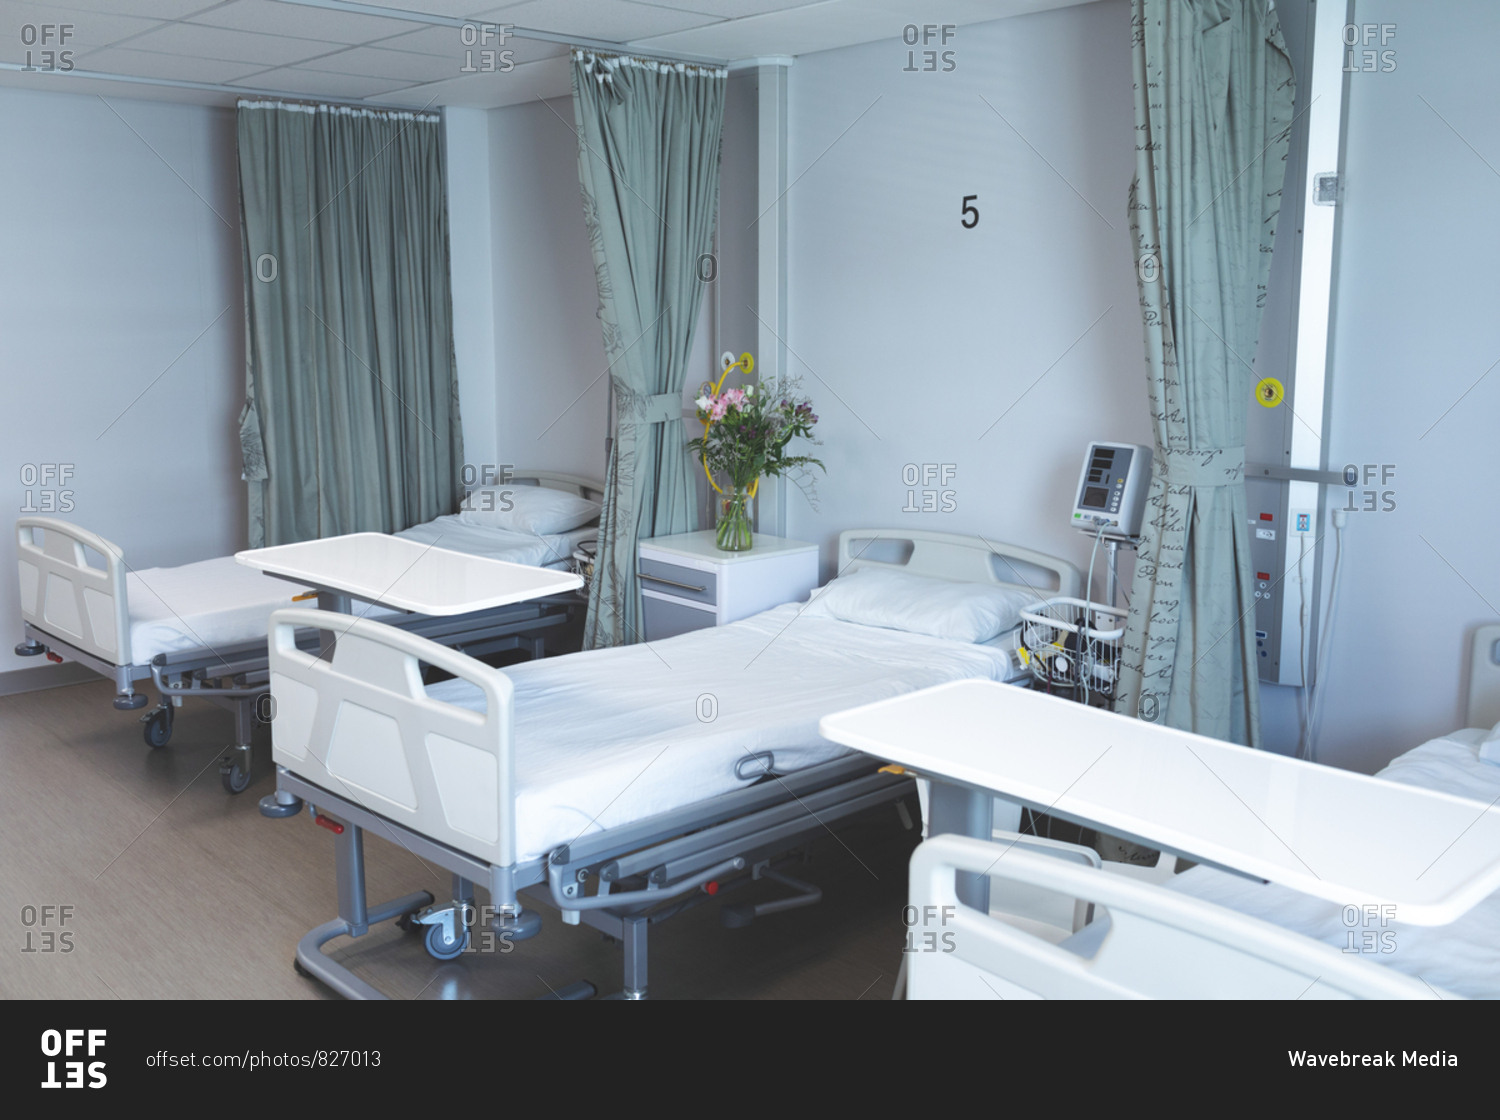 Modern hospital ward with empty beds, medical monitor, green curtains, cupboards, and flowers.